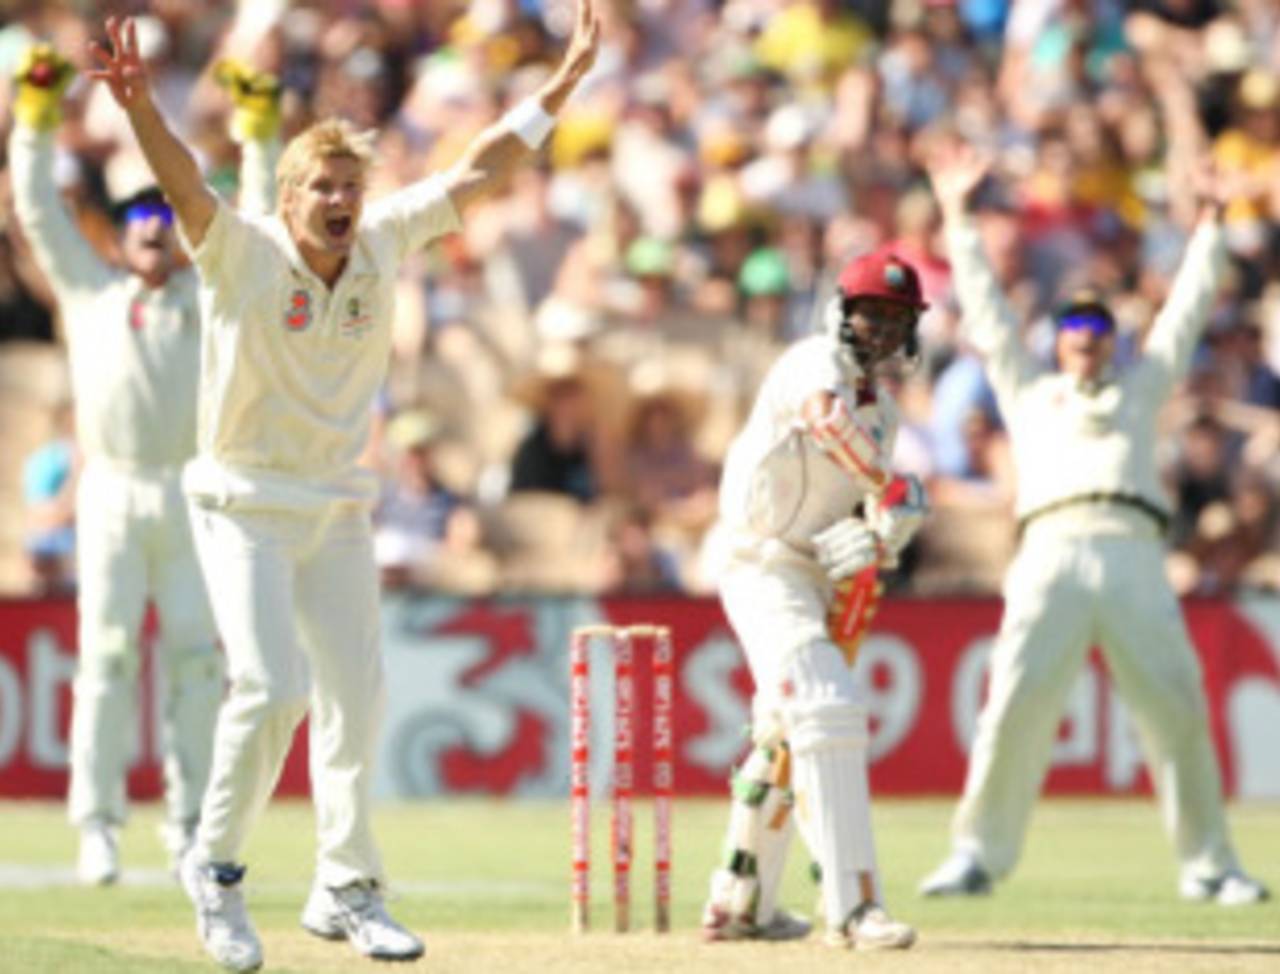 Shane Watson removes Shivnarine Chanderpaul with help from a decision review, 2nd Test, Adelaide, 4 December 2009